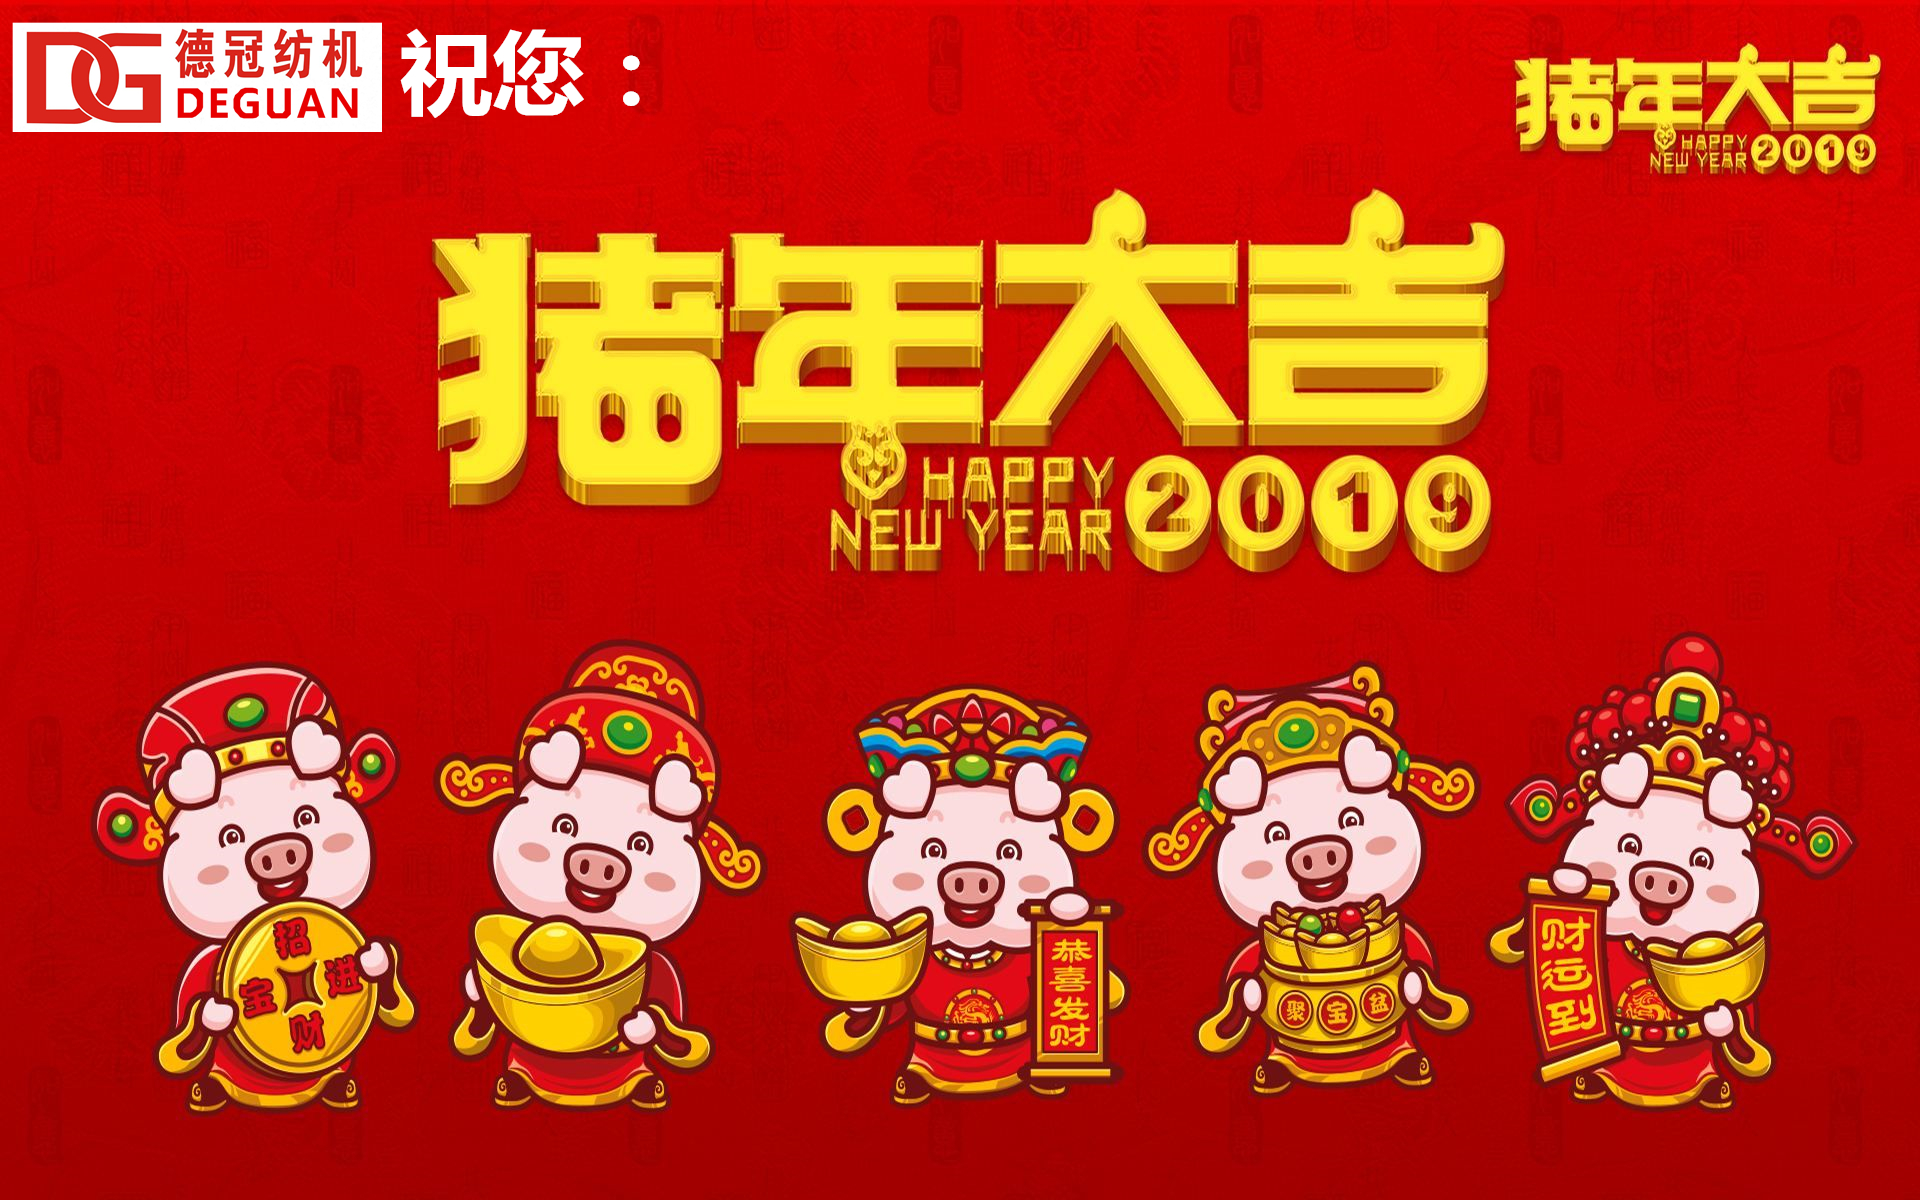 Happy Lunar New Year and best wishes for a healthy and prosperous 2019 to you